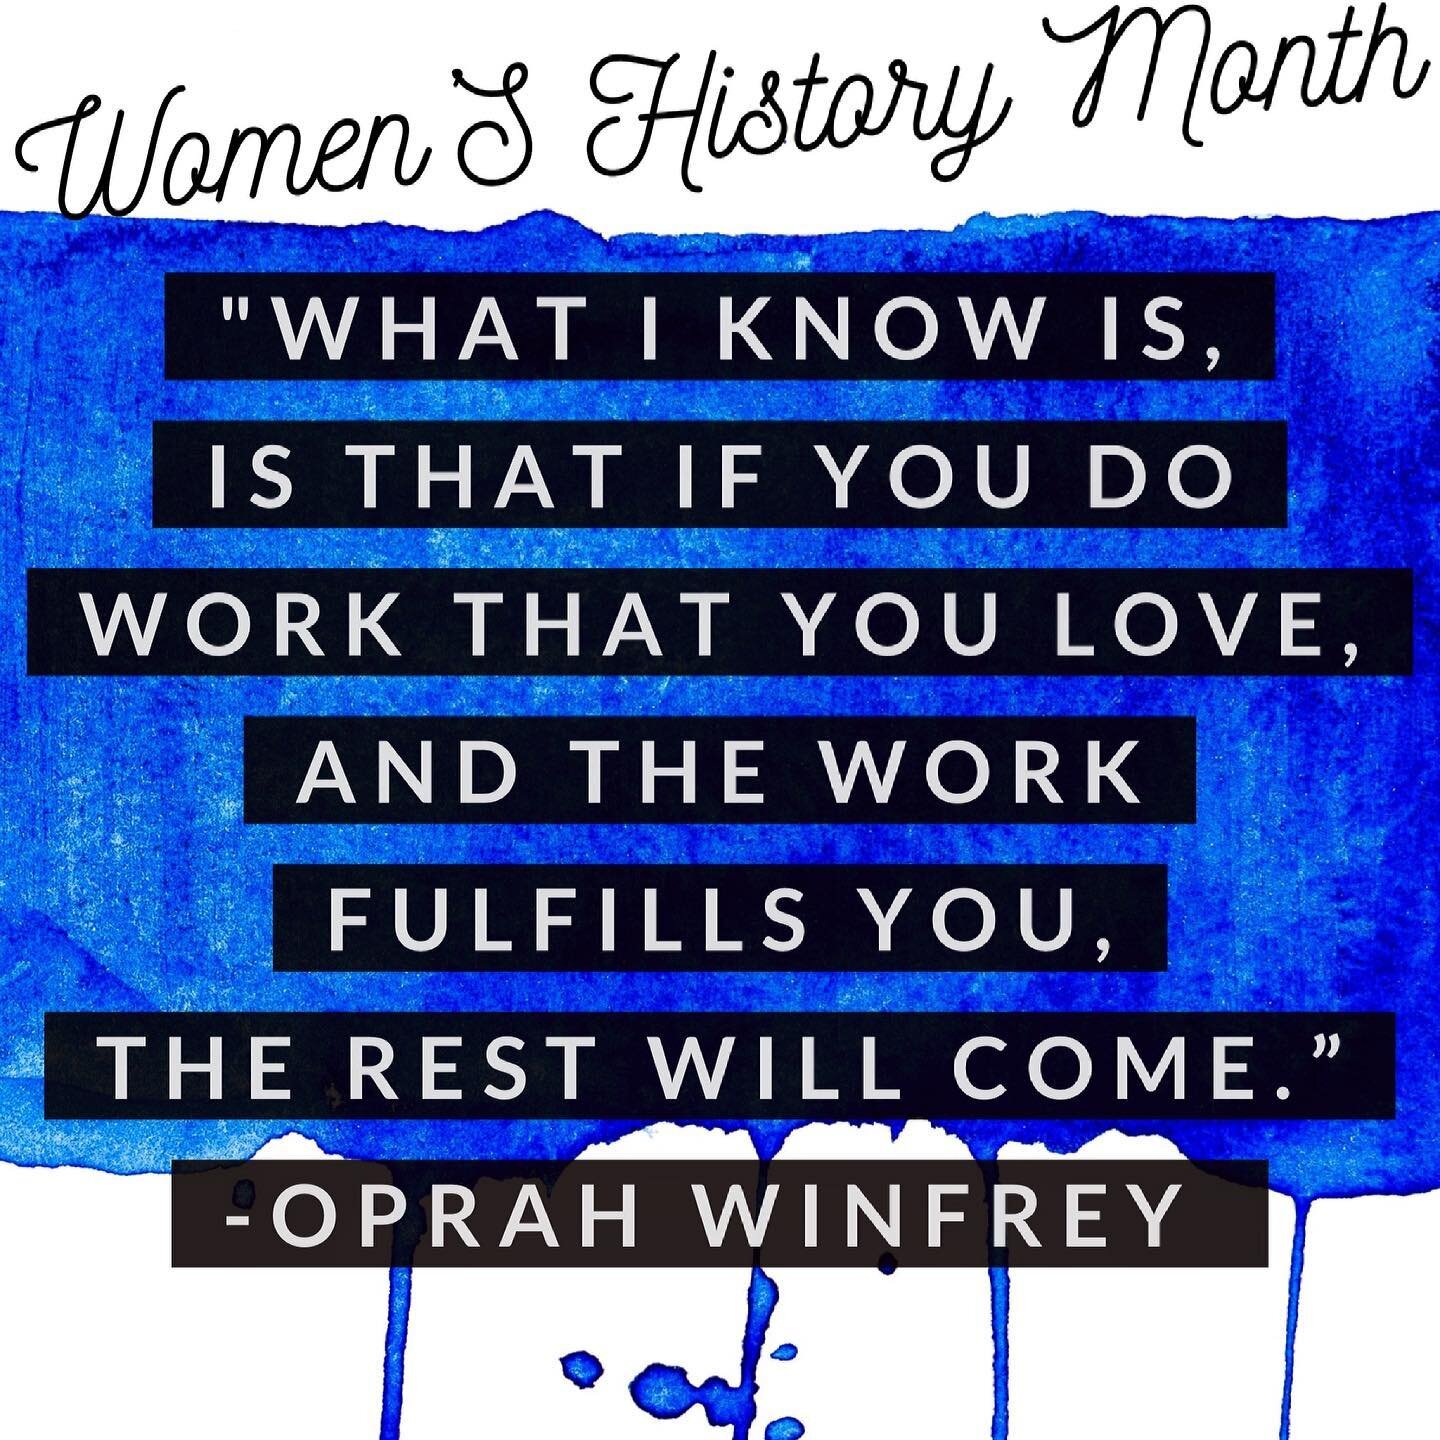 Happy Tuesday! It&rsquo;s a beautiful day to put your intentions for the week into play. For #womens history month we are highlighting the impactful @oprah and her sentiments on following your passions. 
🔥
If what you do sets your soul on fire, the 